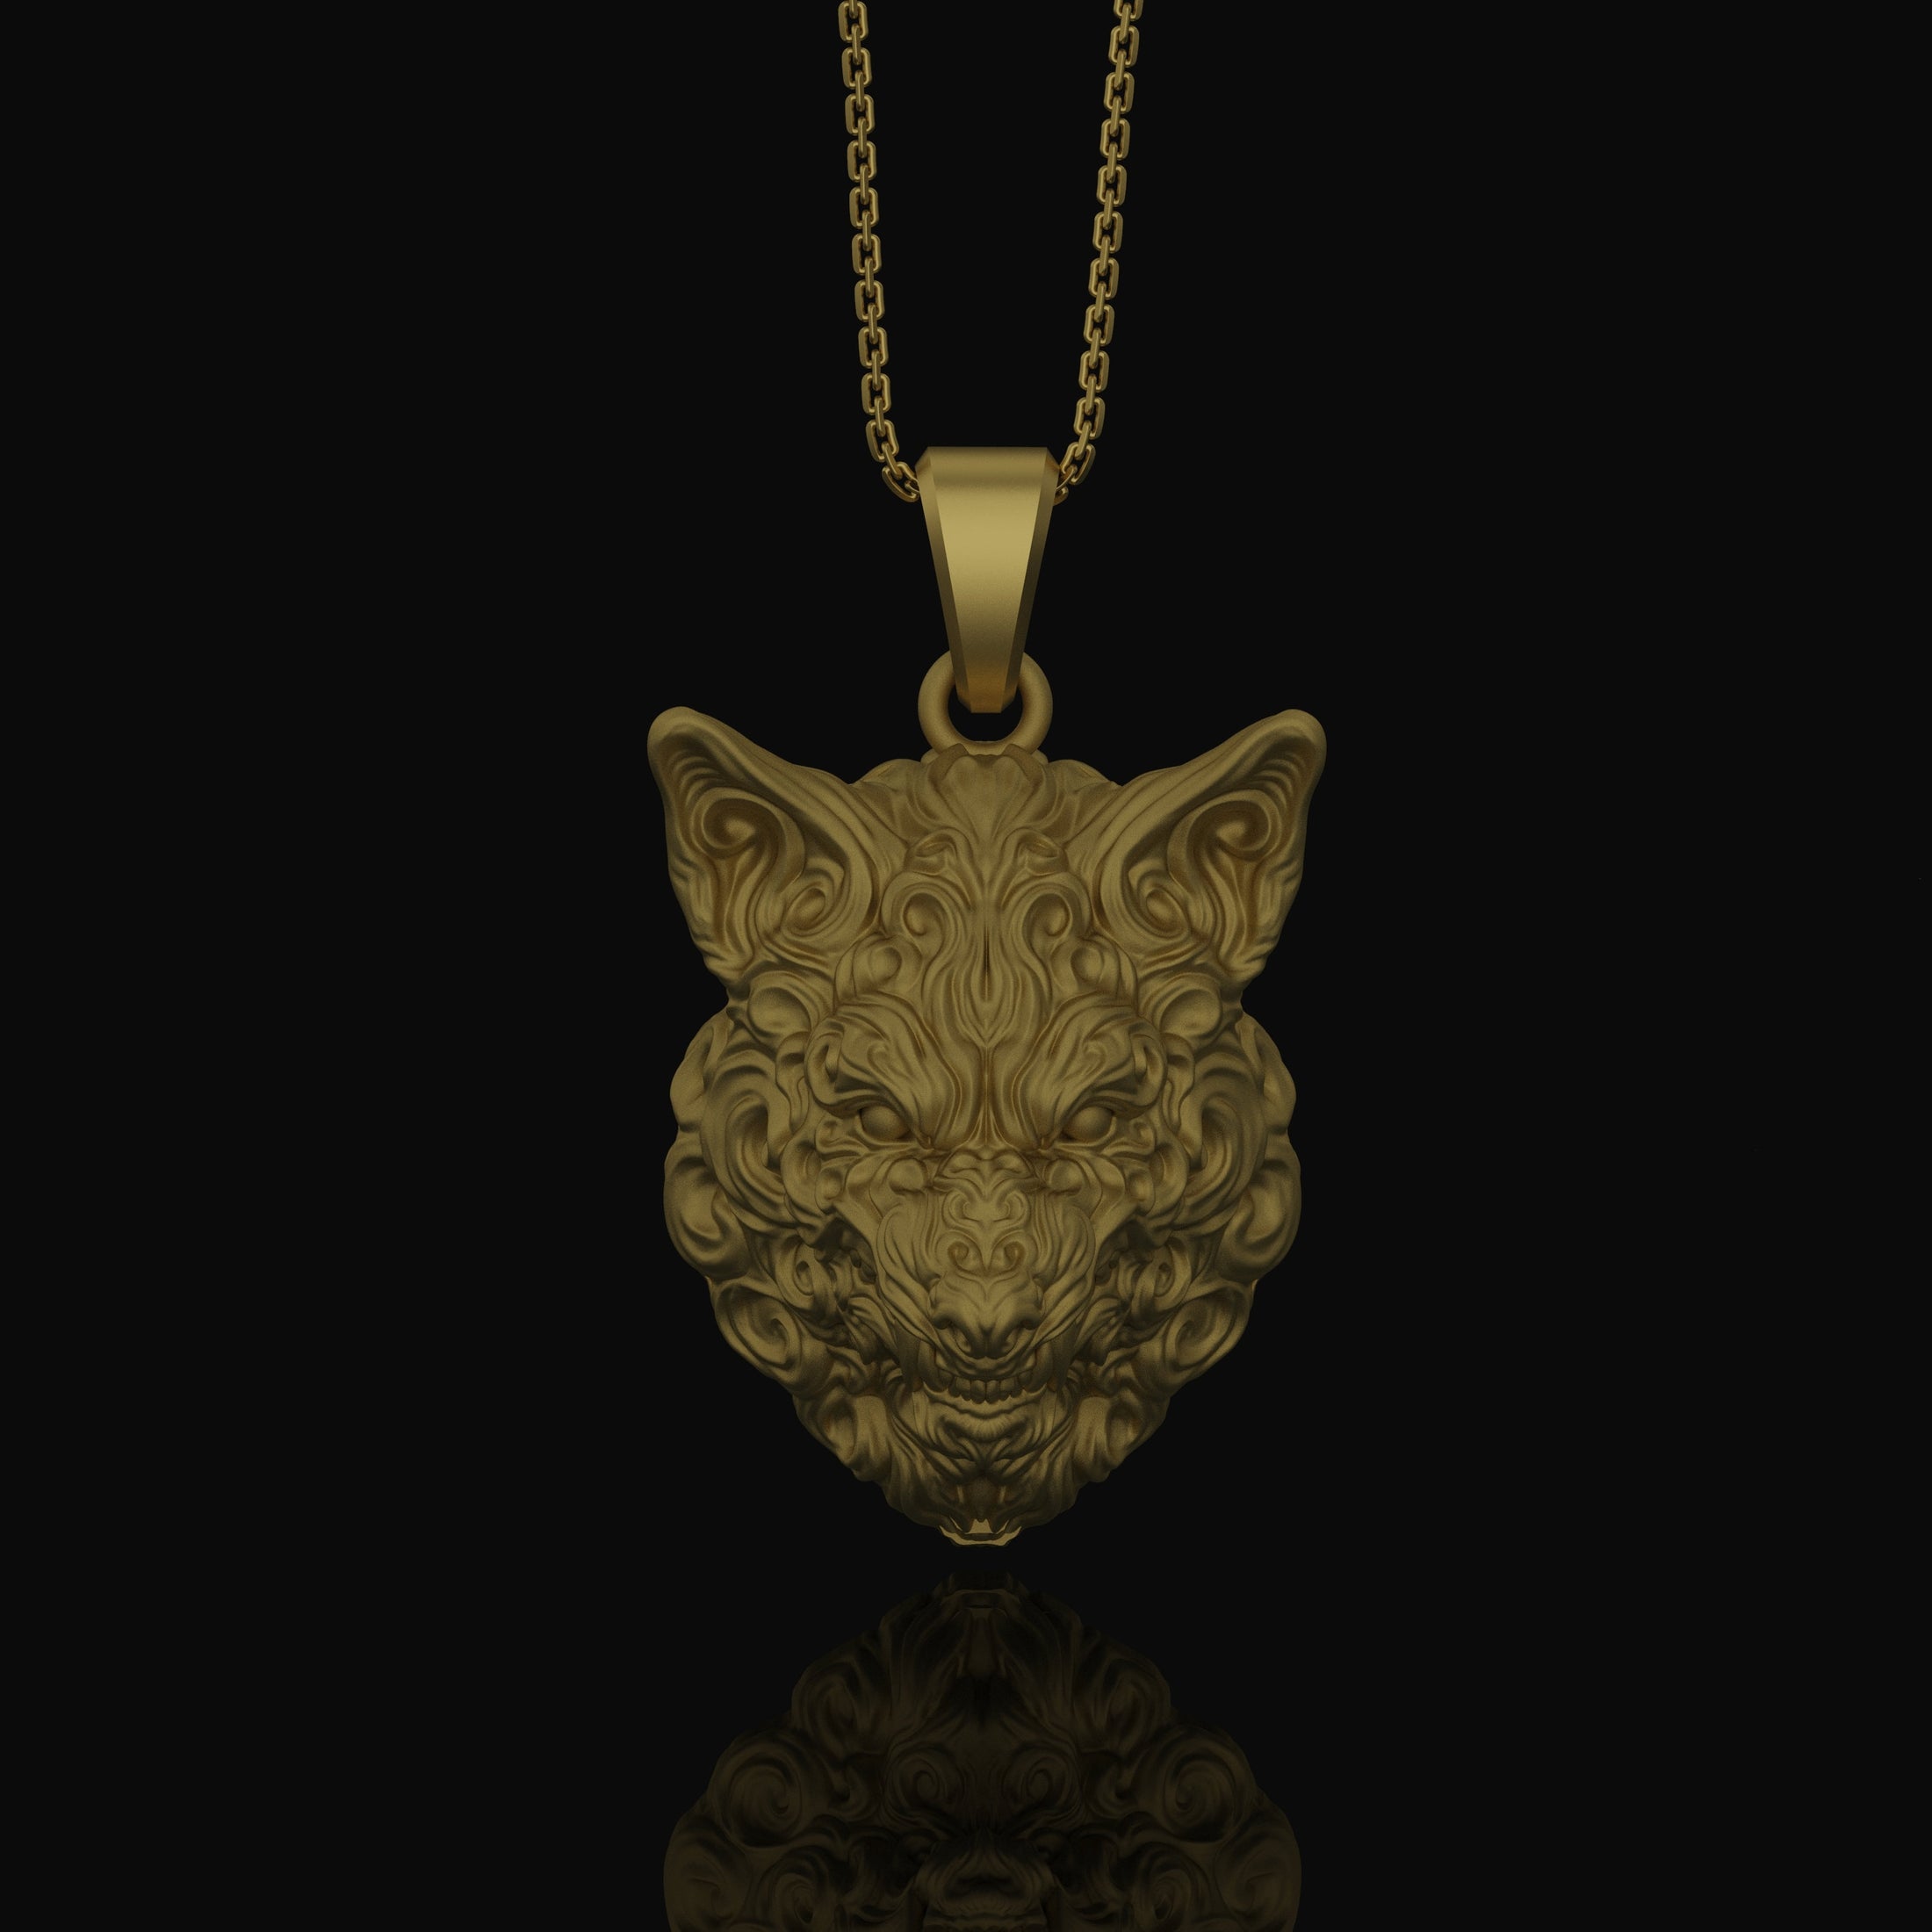 Carved Wolf Head Pendant - Handcrafted Wolf Necklace, Detailed Animal Carving, Nature Inspired Jewelry